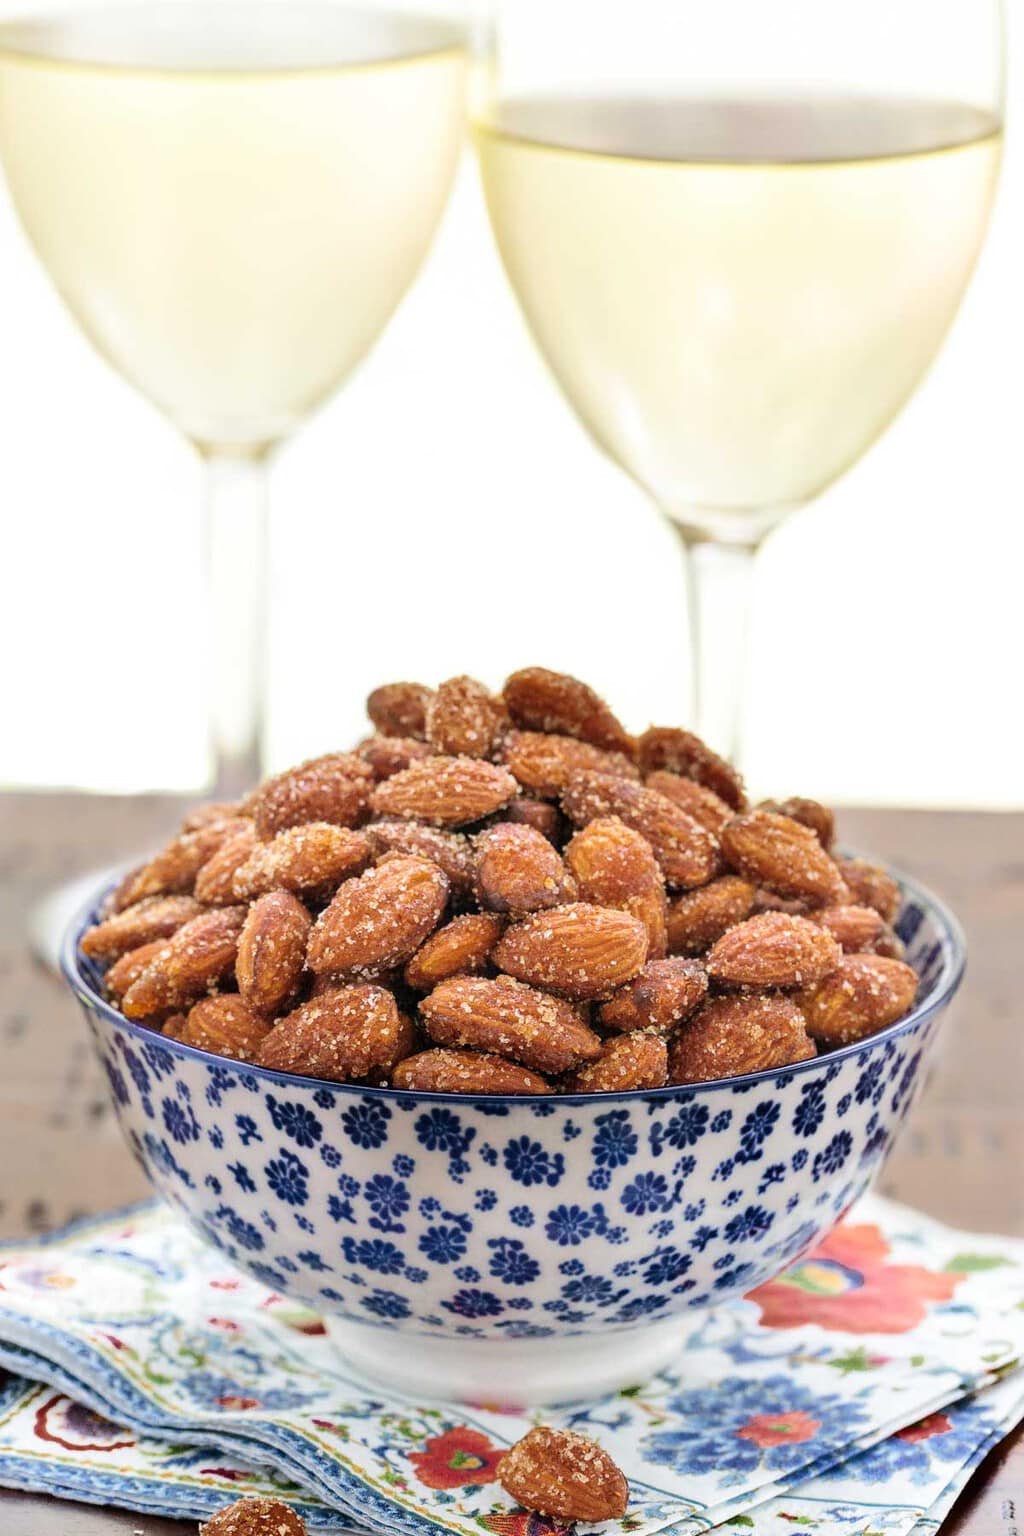 Photo of a blue and white patterned bowl filled with Sweet and Spicy Roasted Almonds on a stack of patterned napkins with glasses of white wine in the background.